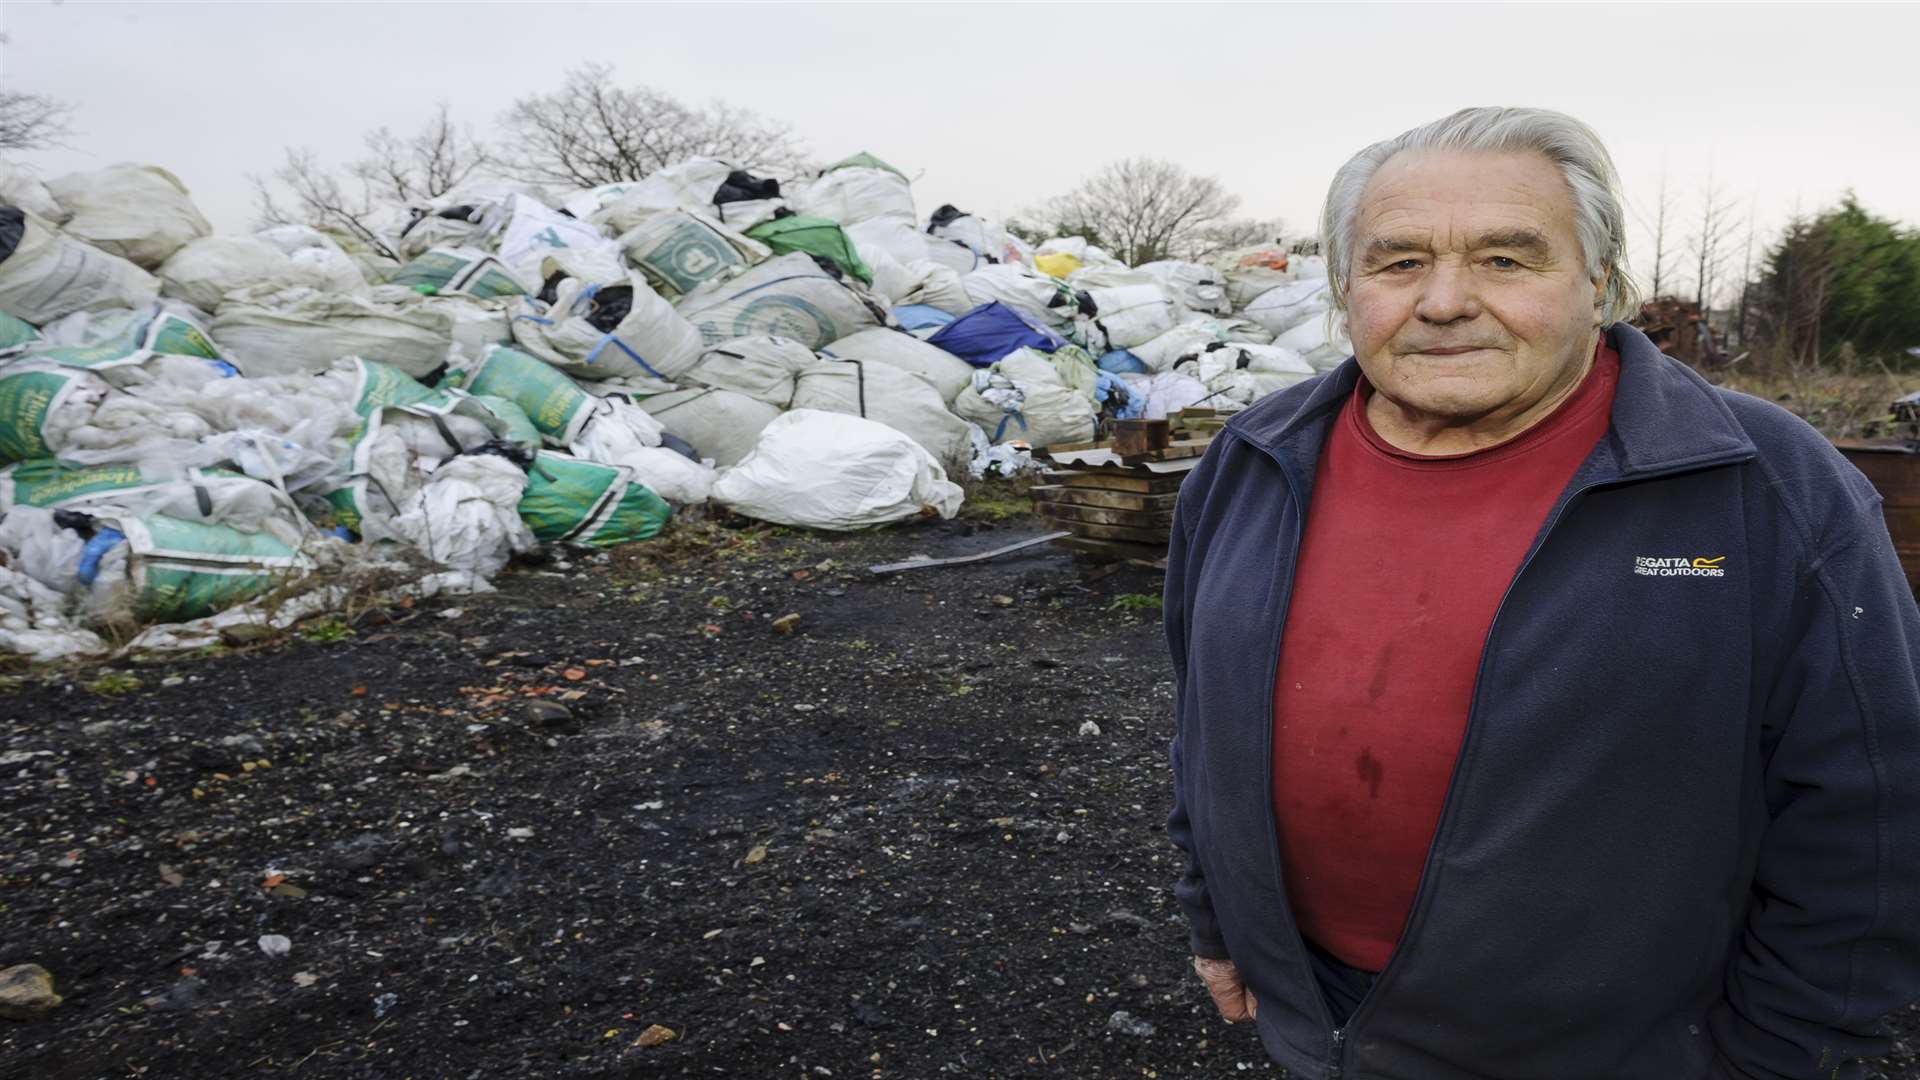 Barton Tarry says waste on his son’s land is a fire hazard